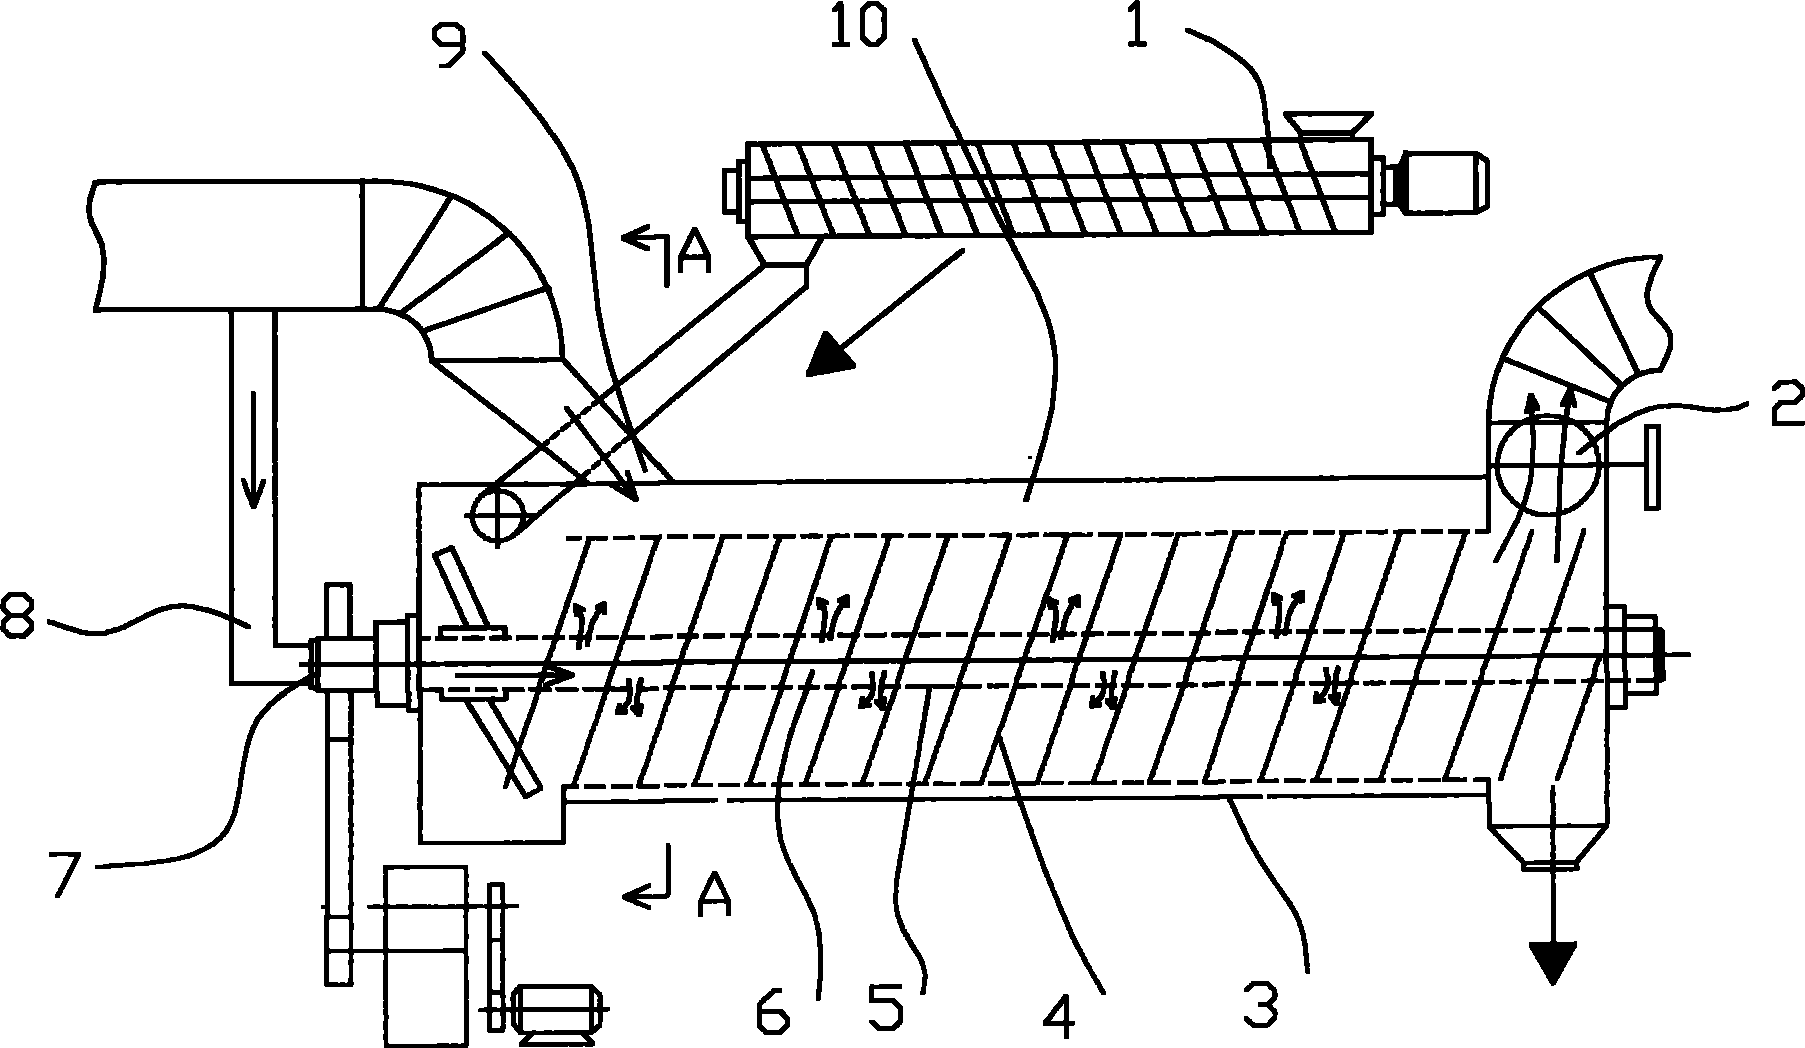 Drying device for drying sludge by using flue gas